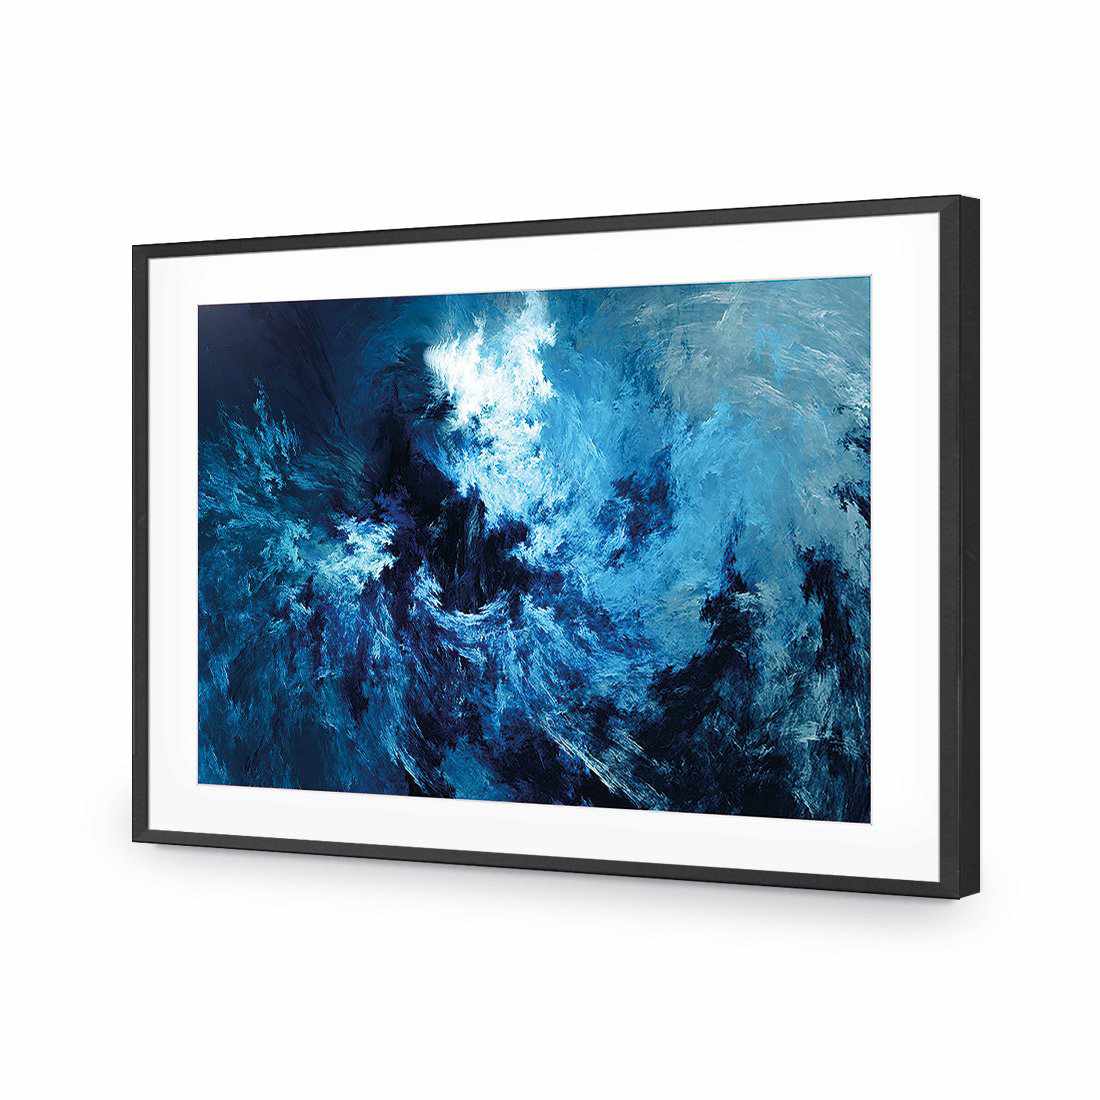 Into the Storm-Acrylic-Wall Art Design-With Border-Acrylic - Black Frame-45x30cm-Wall Art Designs